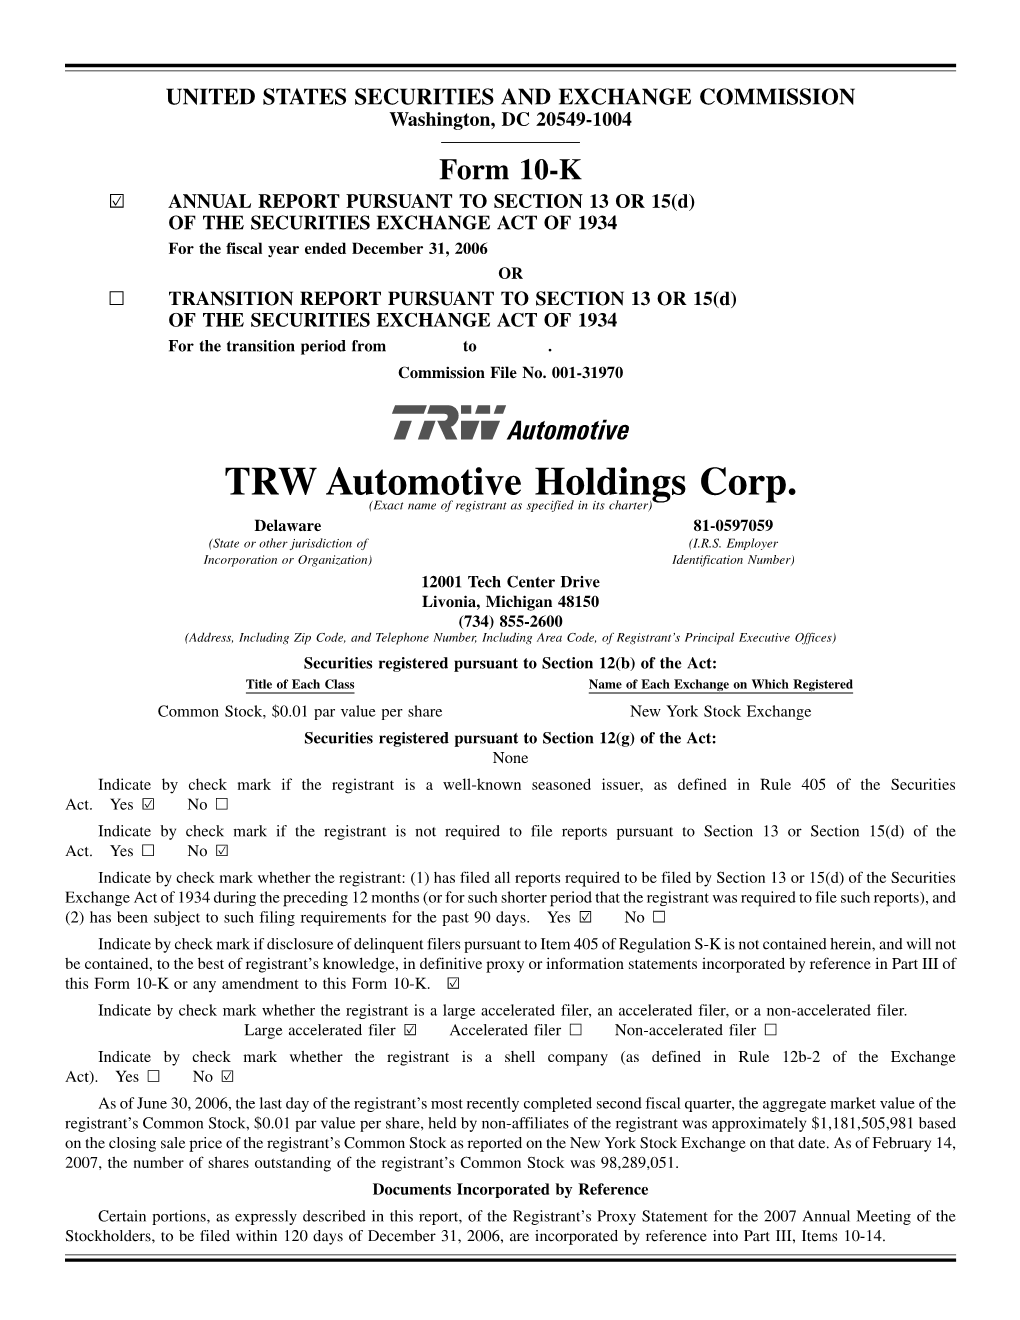 TRW Automotive Holdings Corp. (Exact Name of Registrant As Specified in Its Charter) Delaware 81-0597059 (State Or Other Jurisdiction of (I.R.S